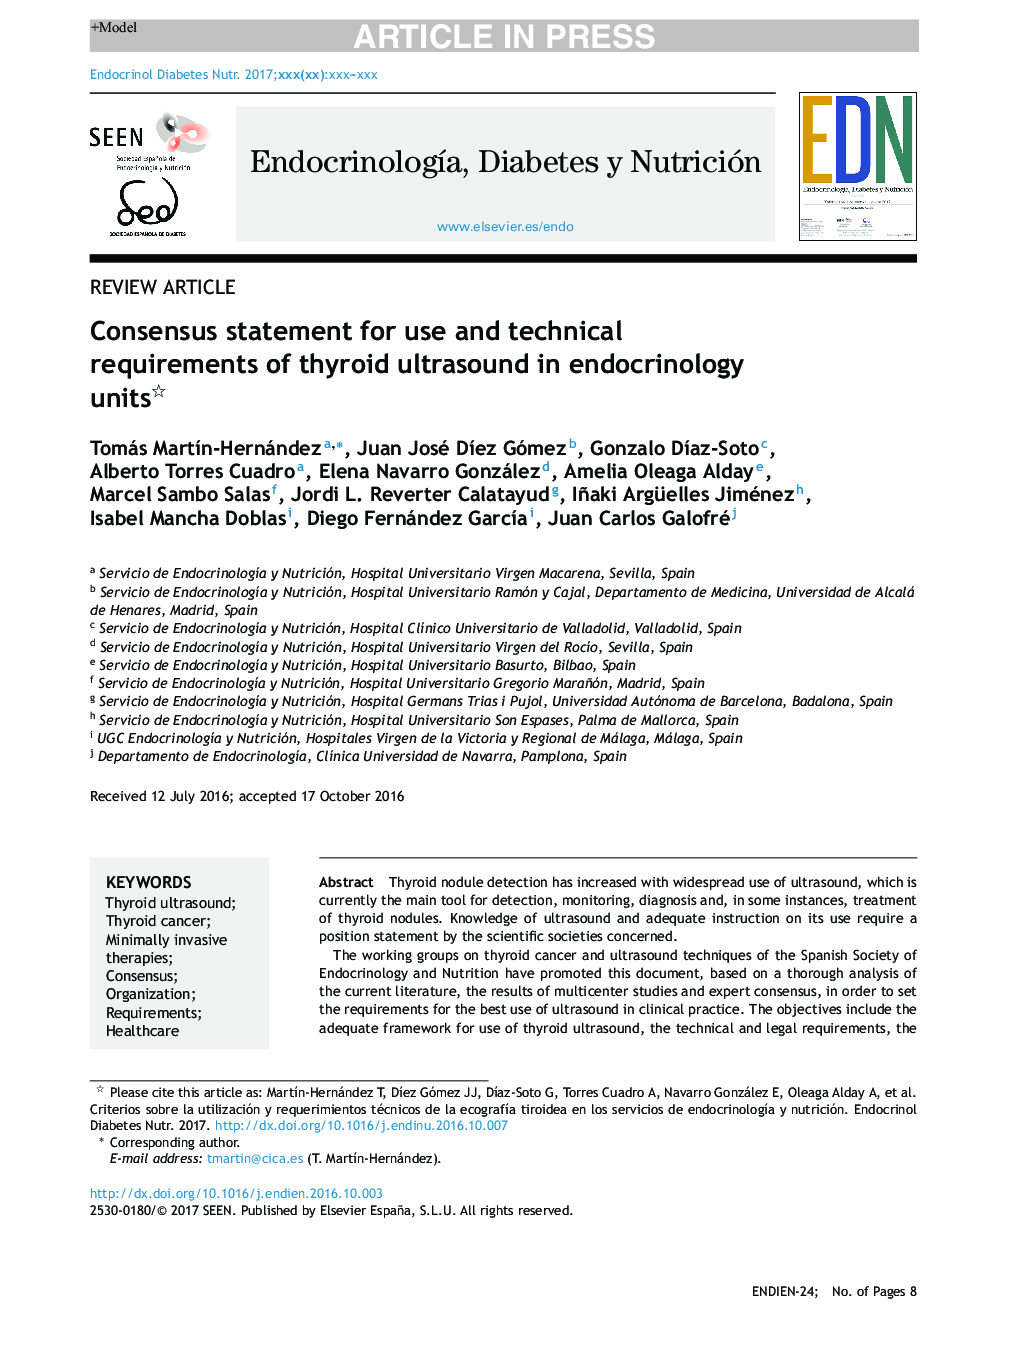 Consensus statement for use and technical requirements of thyroid ultrasound in endocrinology units